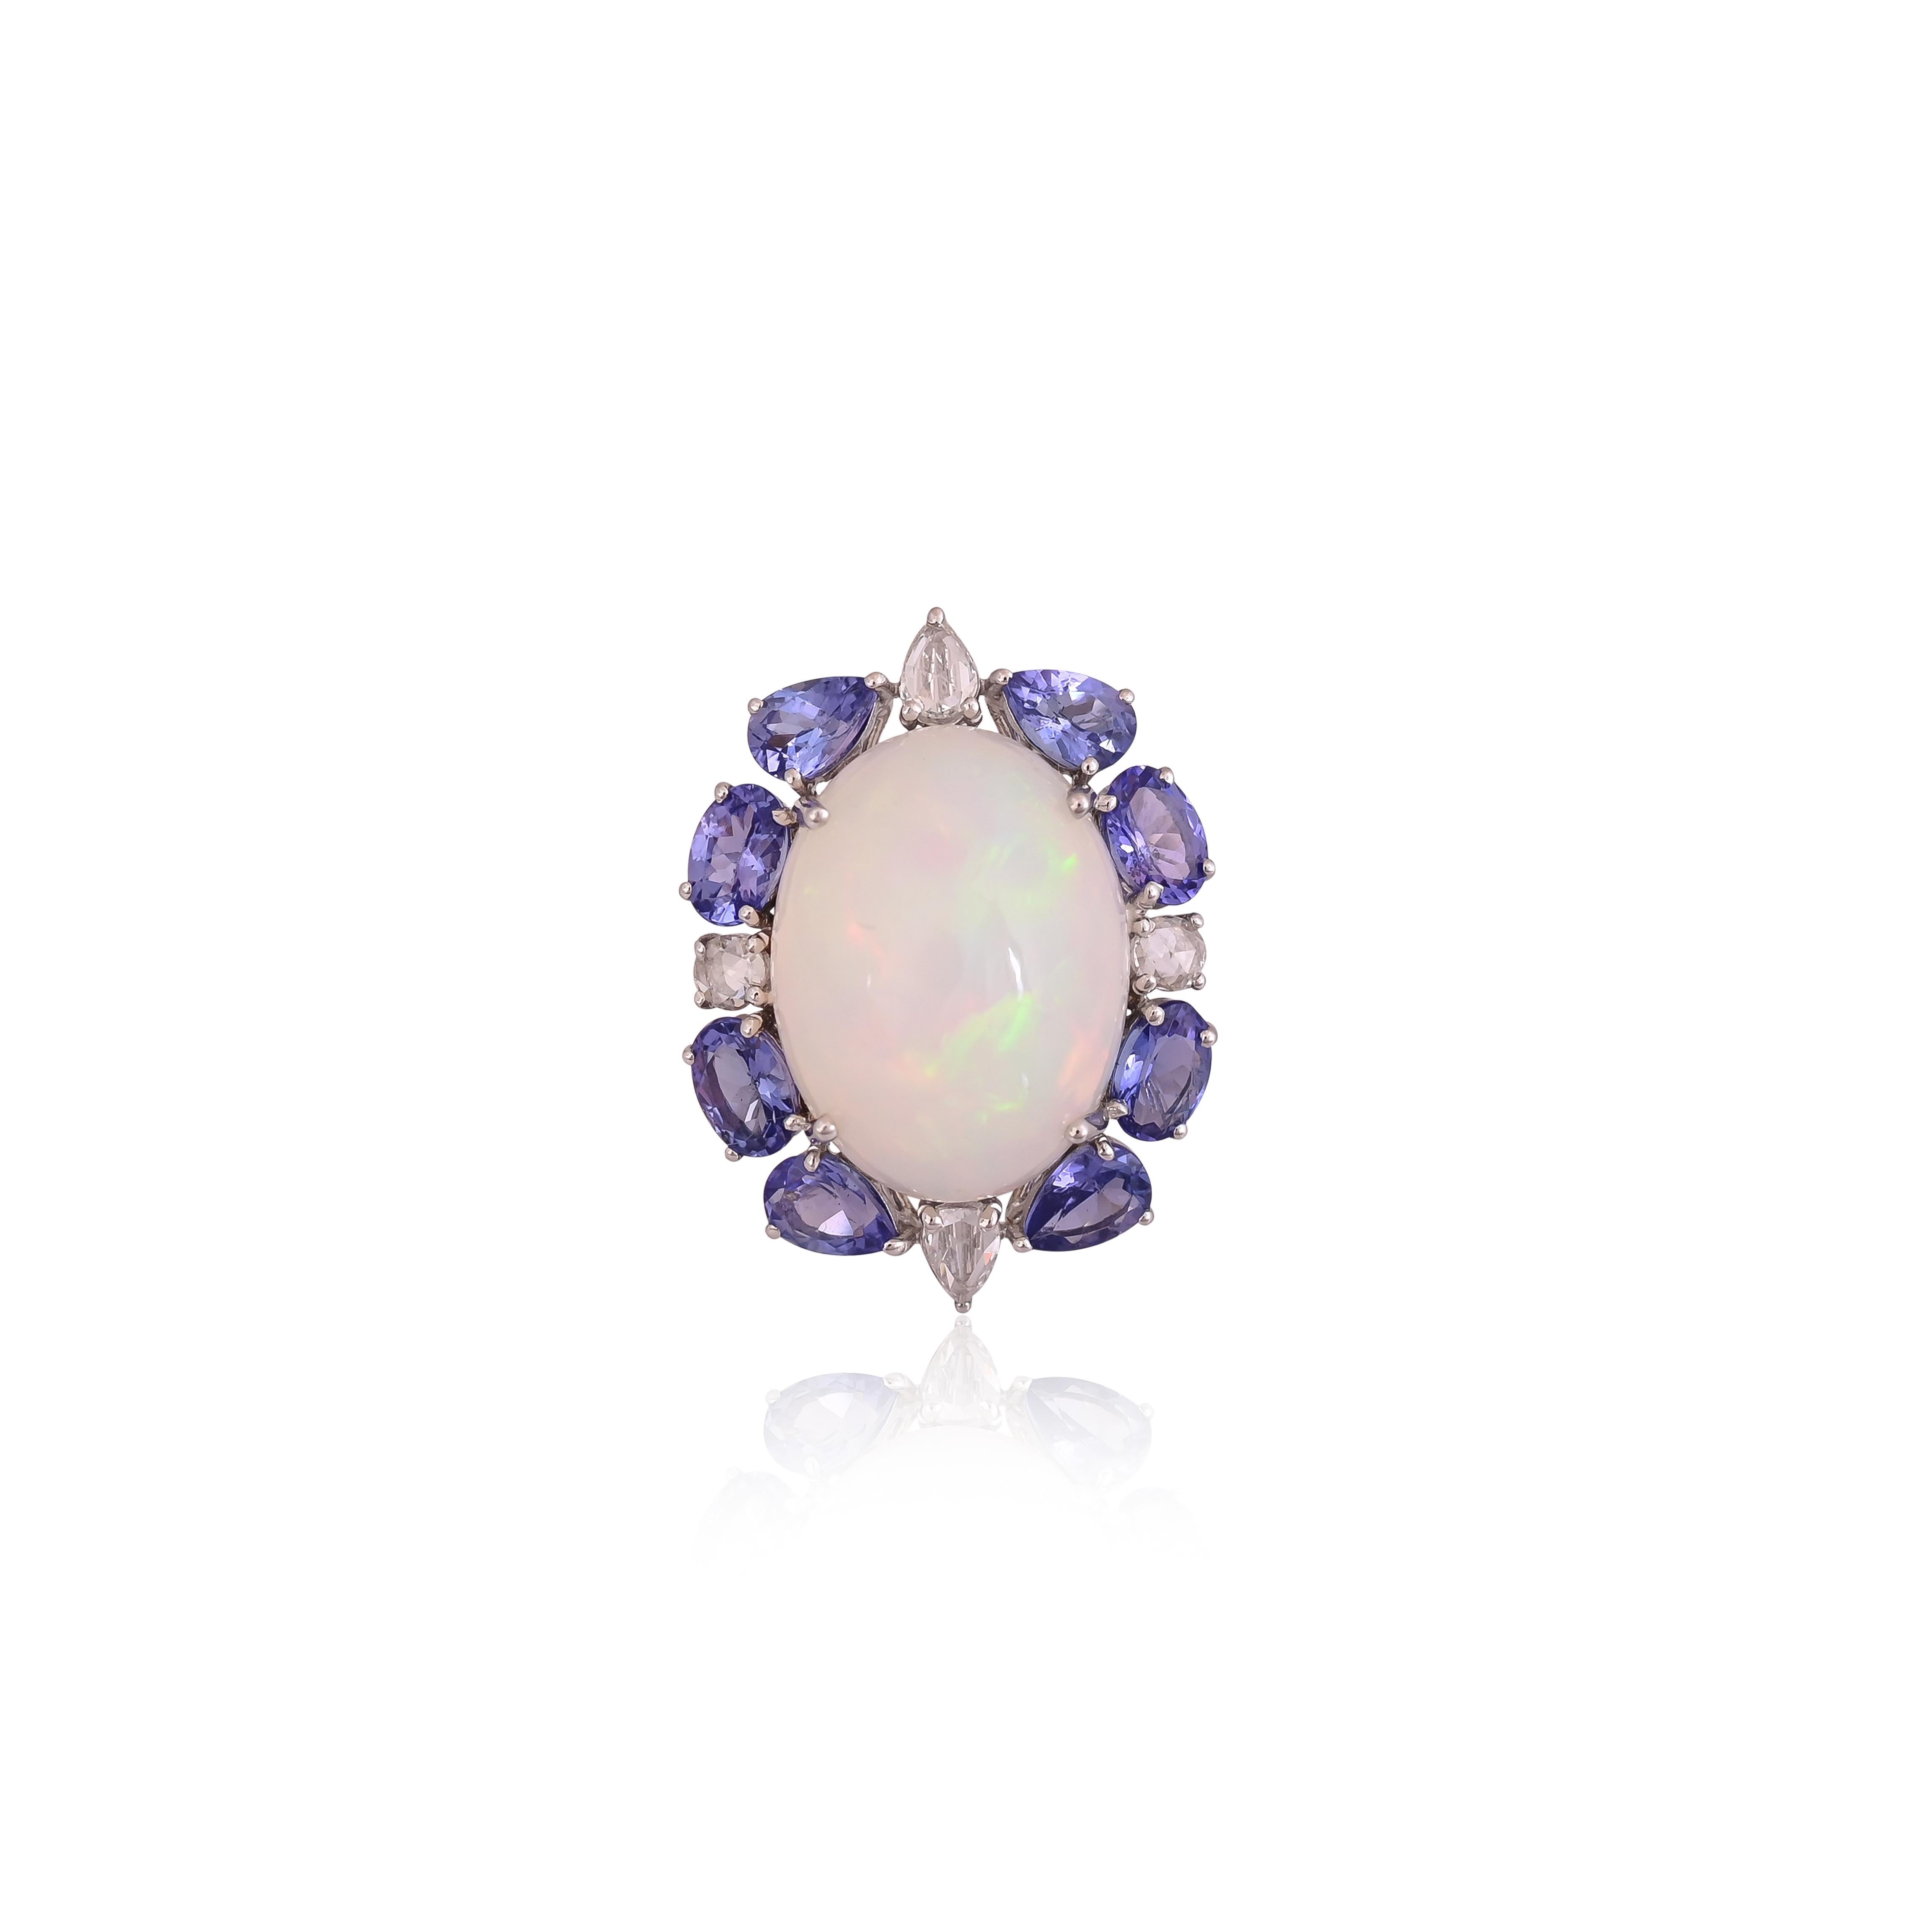 A very beautiful & gorgeous, modern style, Opal & Tanzanite Ring set in 18K White Gold & Diamonds. The Opal Cabochon is of Ethiopian origin and weighs 13.68 carats. The Tanzanite weight is 4.19 carats. The Tanzanites are responsibly sourced from